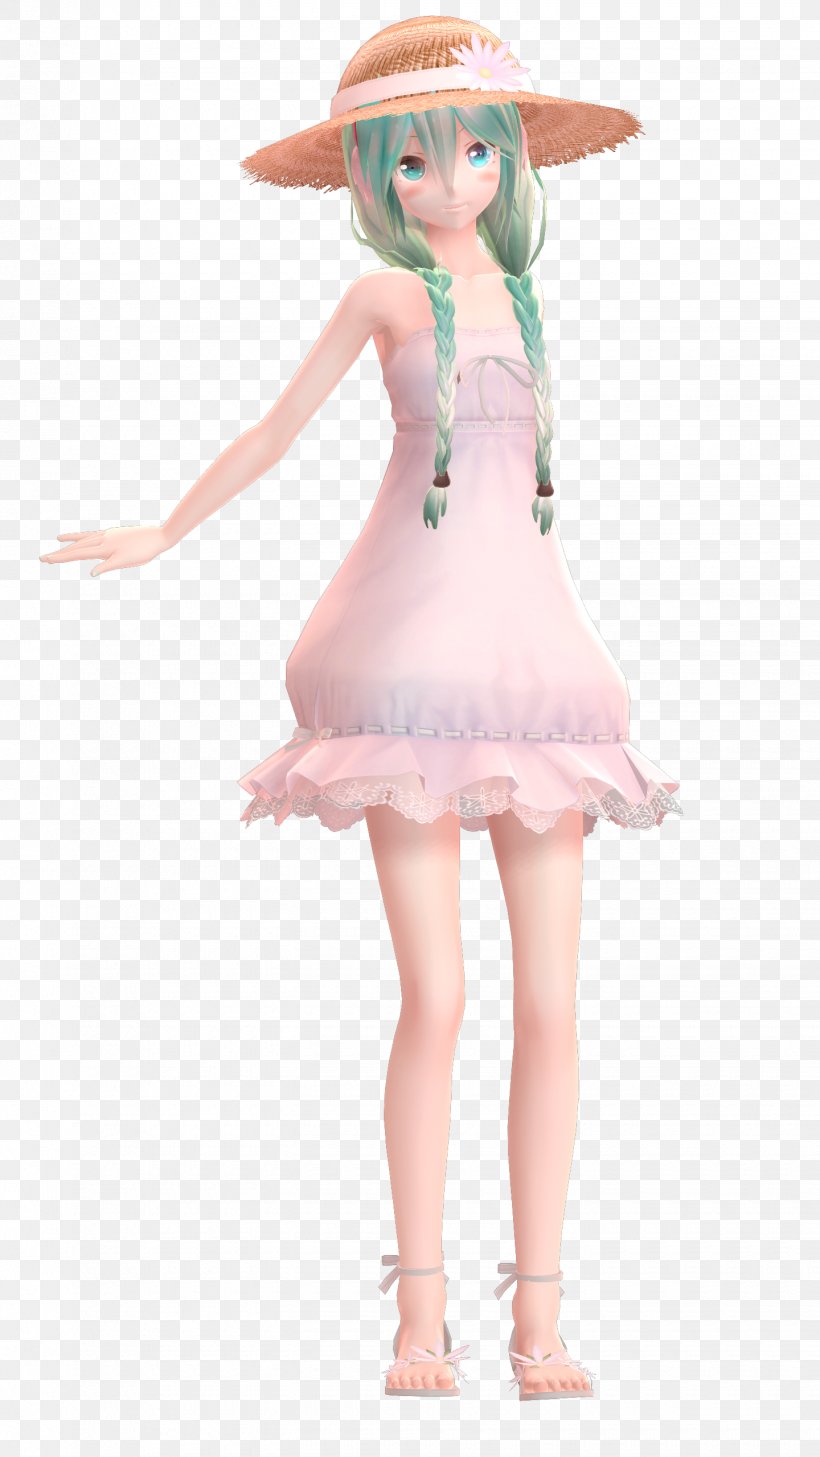 Fairy Doll, PNG, 1440x2560px, Fairy, Costume, Doll, Fictional Character, Figurine Download Free